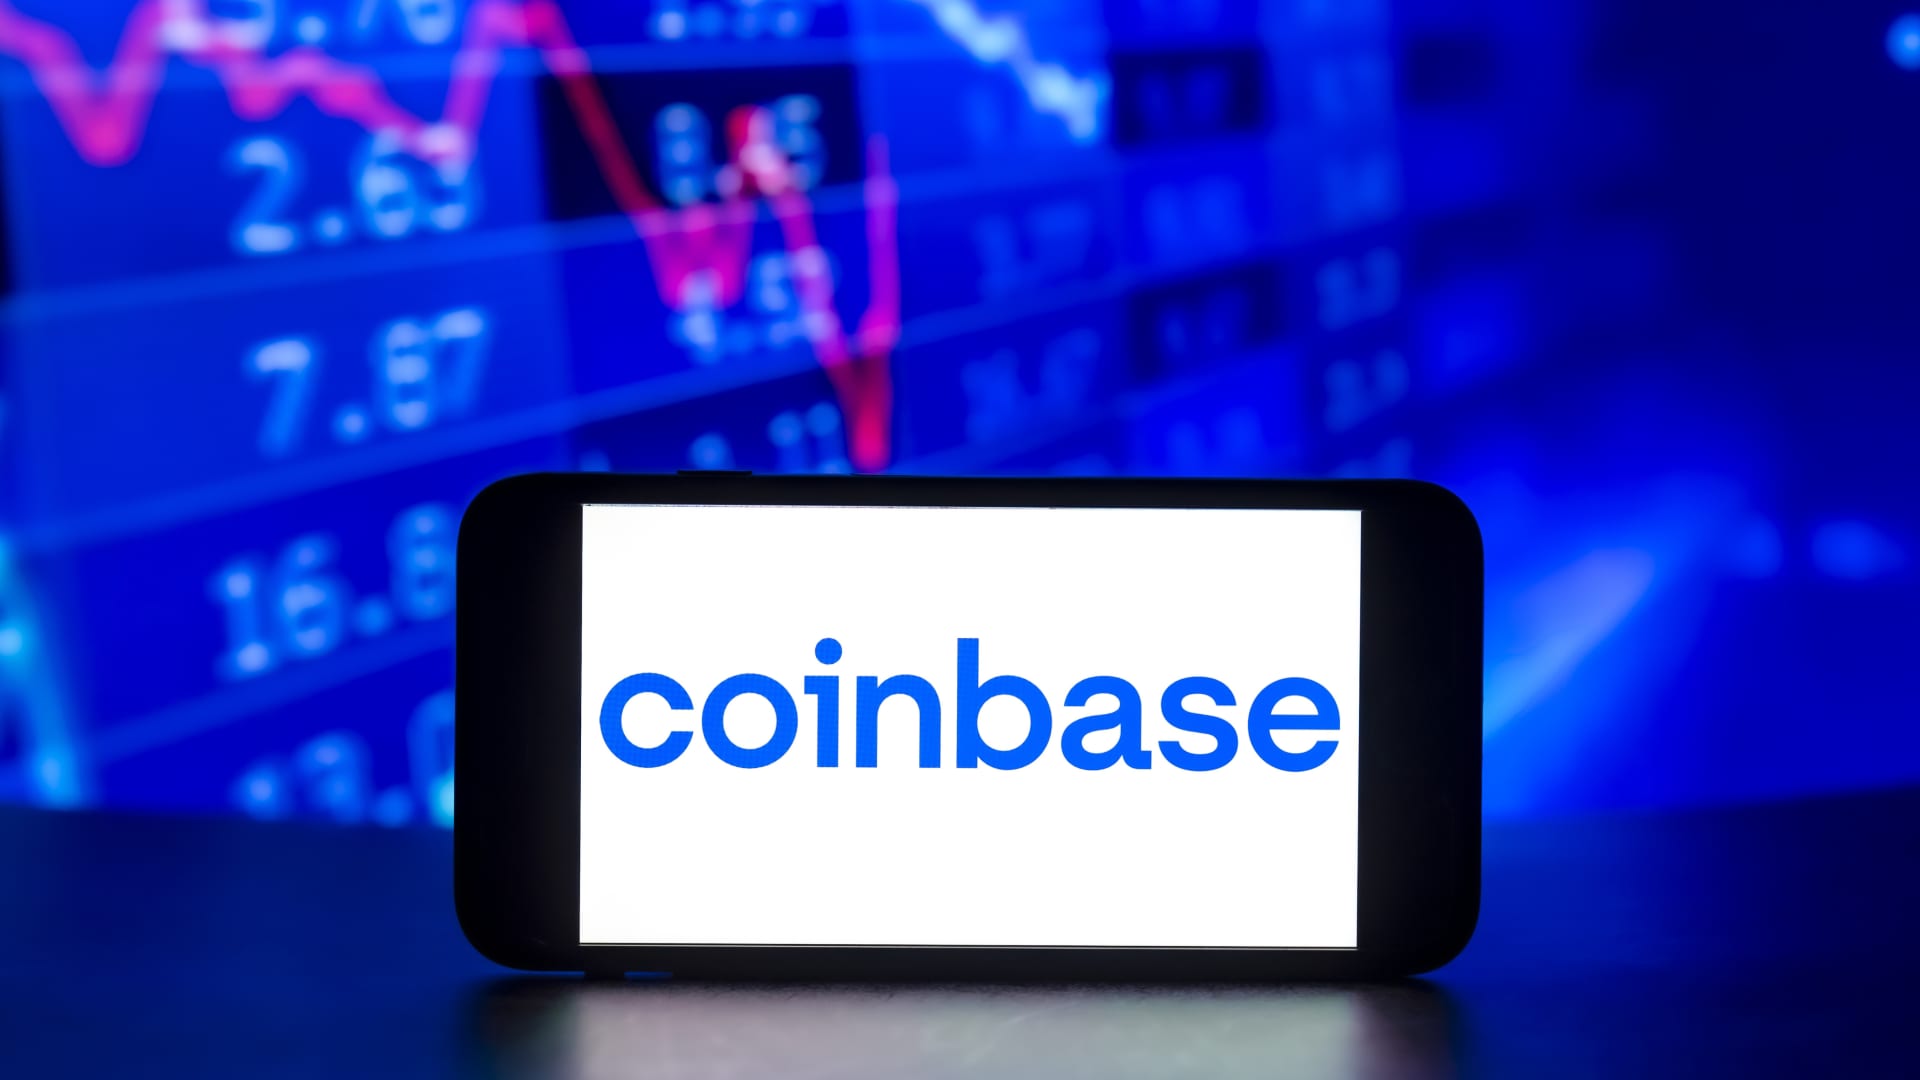 The Coinbase logo is displayed on a mobile phone screen with stock market percentages in the background.